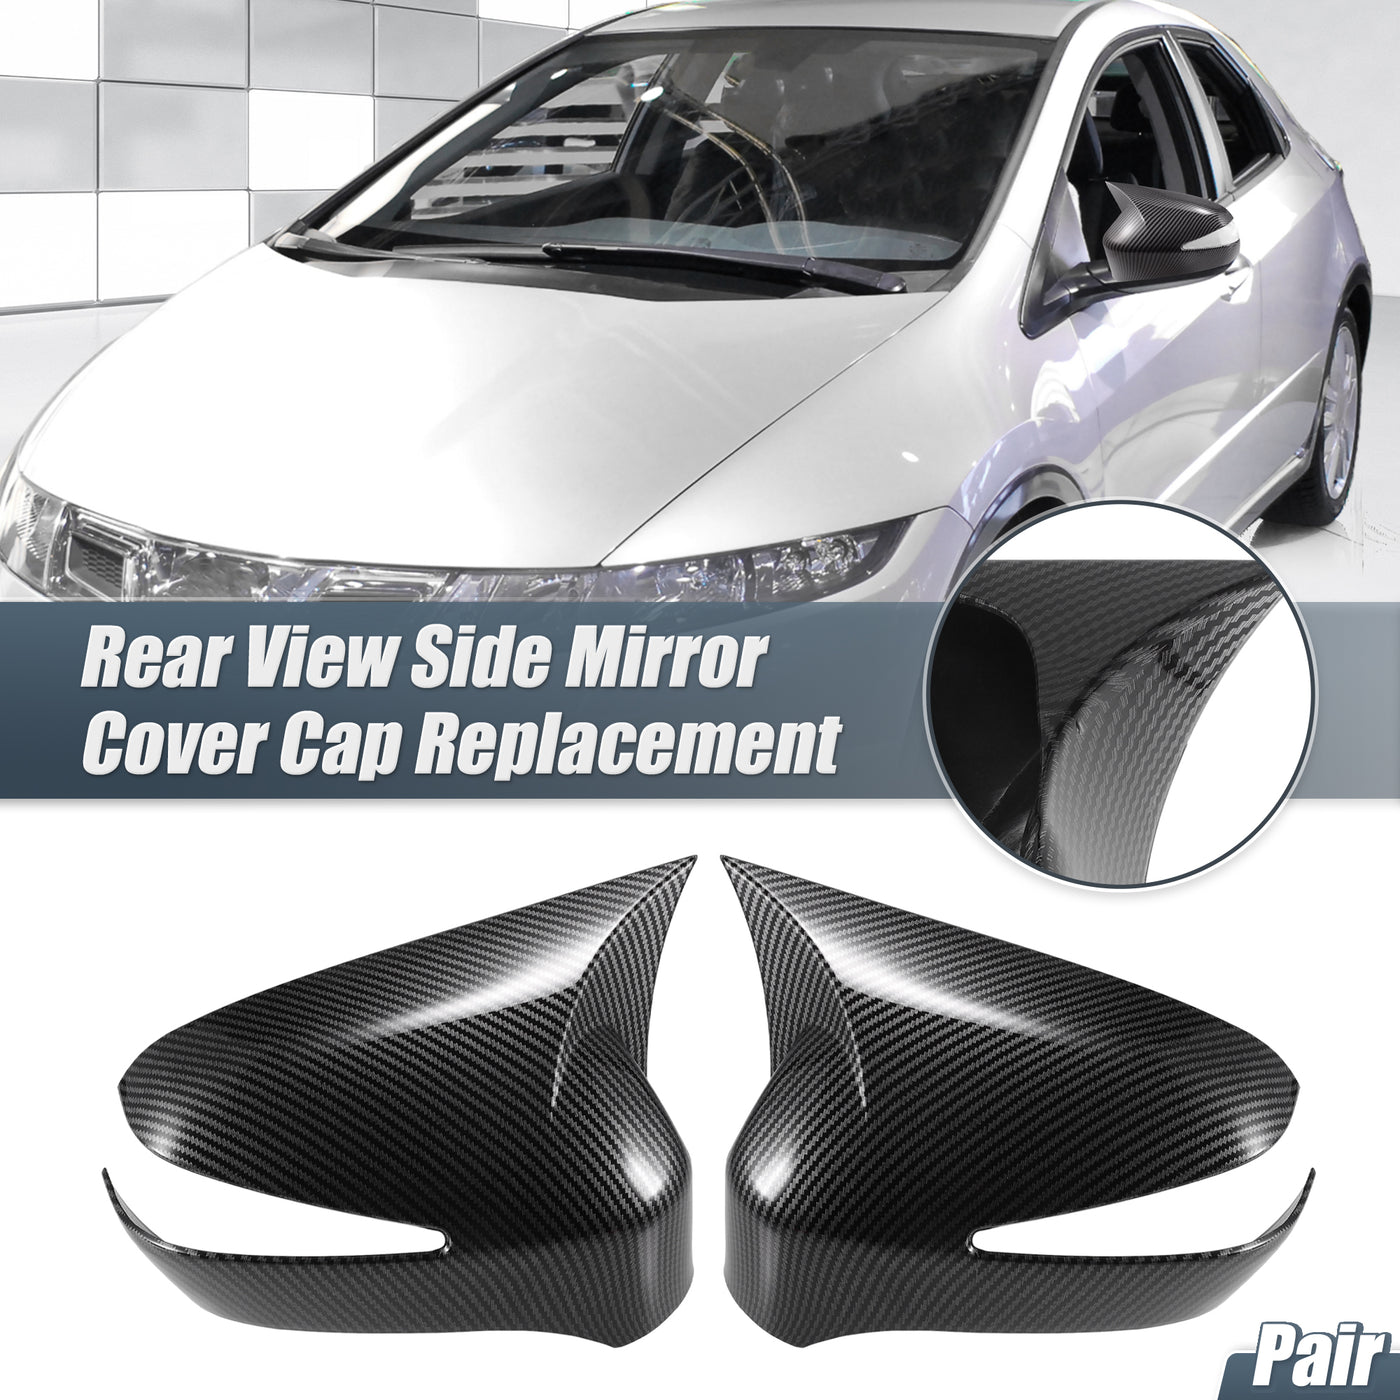 X AUTOHAUX 1 Pair Car Rear View Driver Passenger Side Mirror Cover Cap Overlay Black Carbon Fiber Pattern for Honda Civic 8th Gen 2006-2011 Mirror for Models with Turn Signal Light